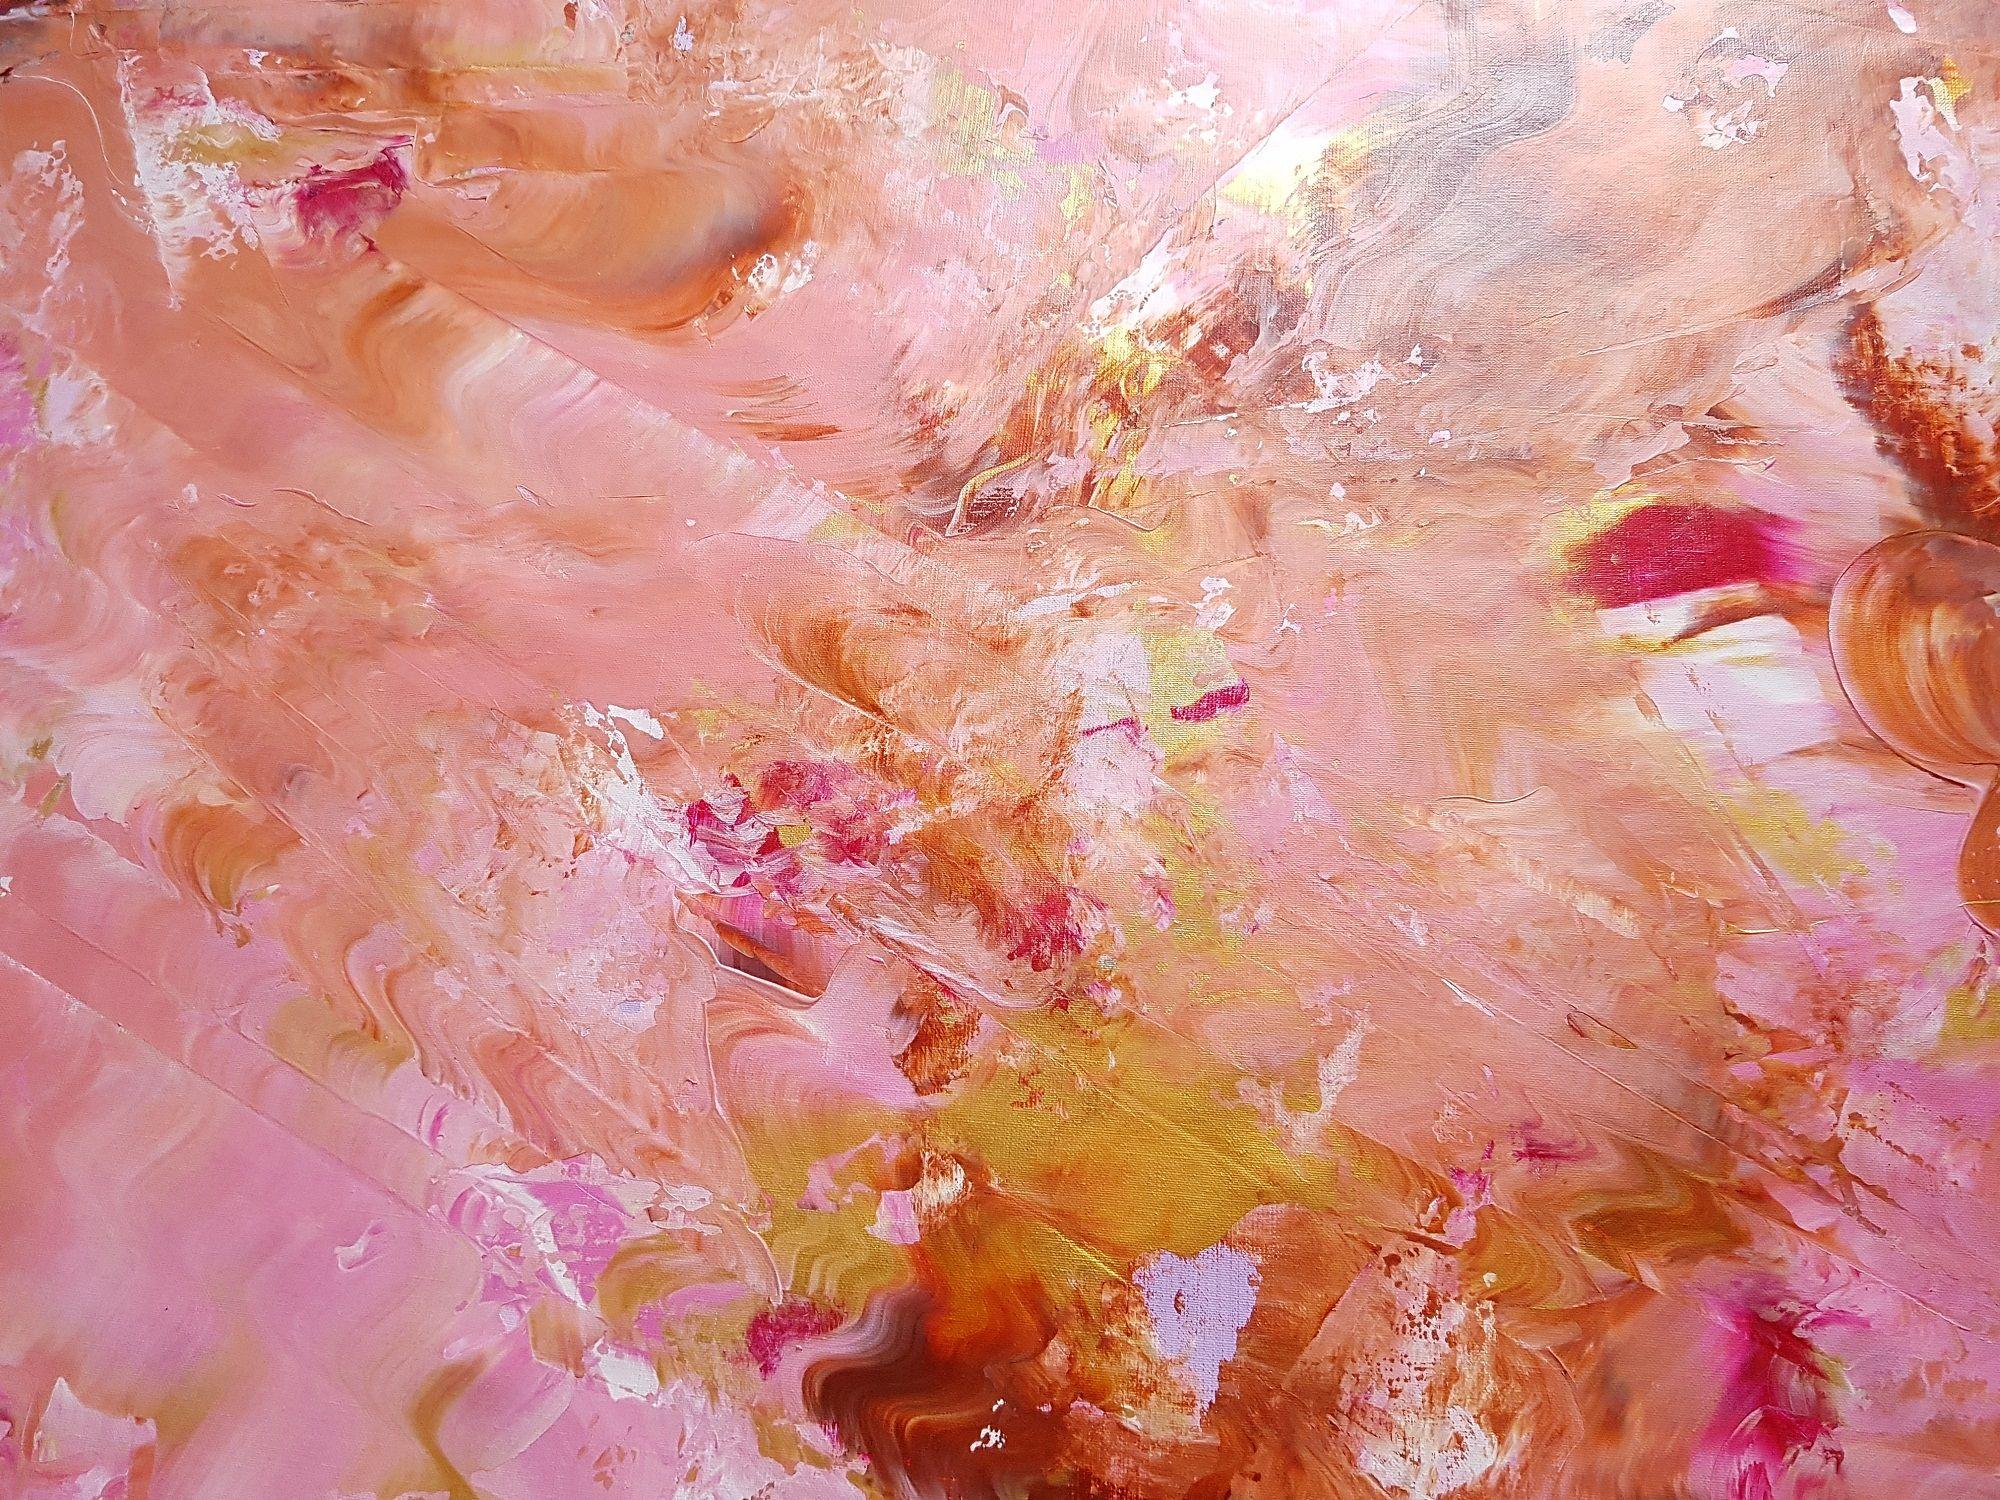 An original one of kind multilayer palette knife abstract painting.    Warm and earthy colors full of details and movement.    Shades of pink, light purple, burnt sienna with a touch of golden color.   Golden details shine beautifully as the light